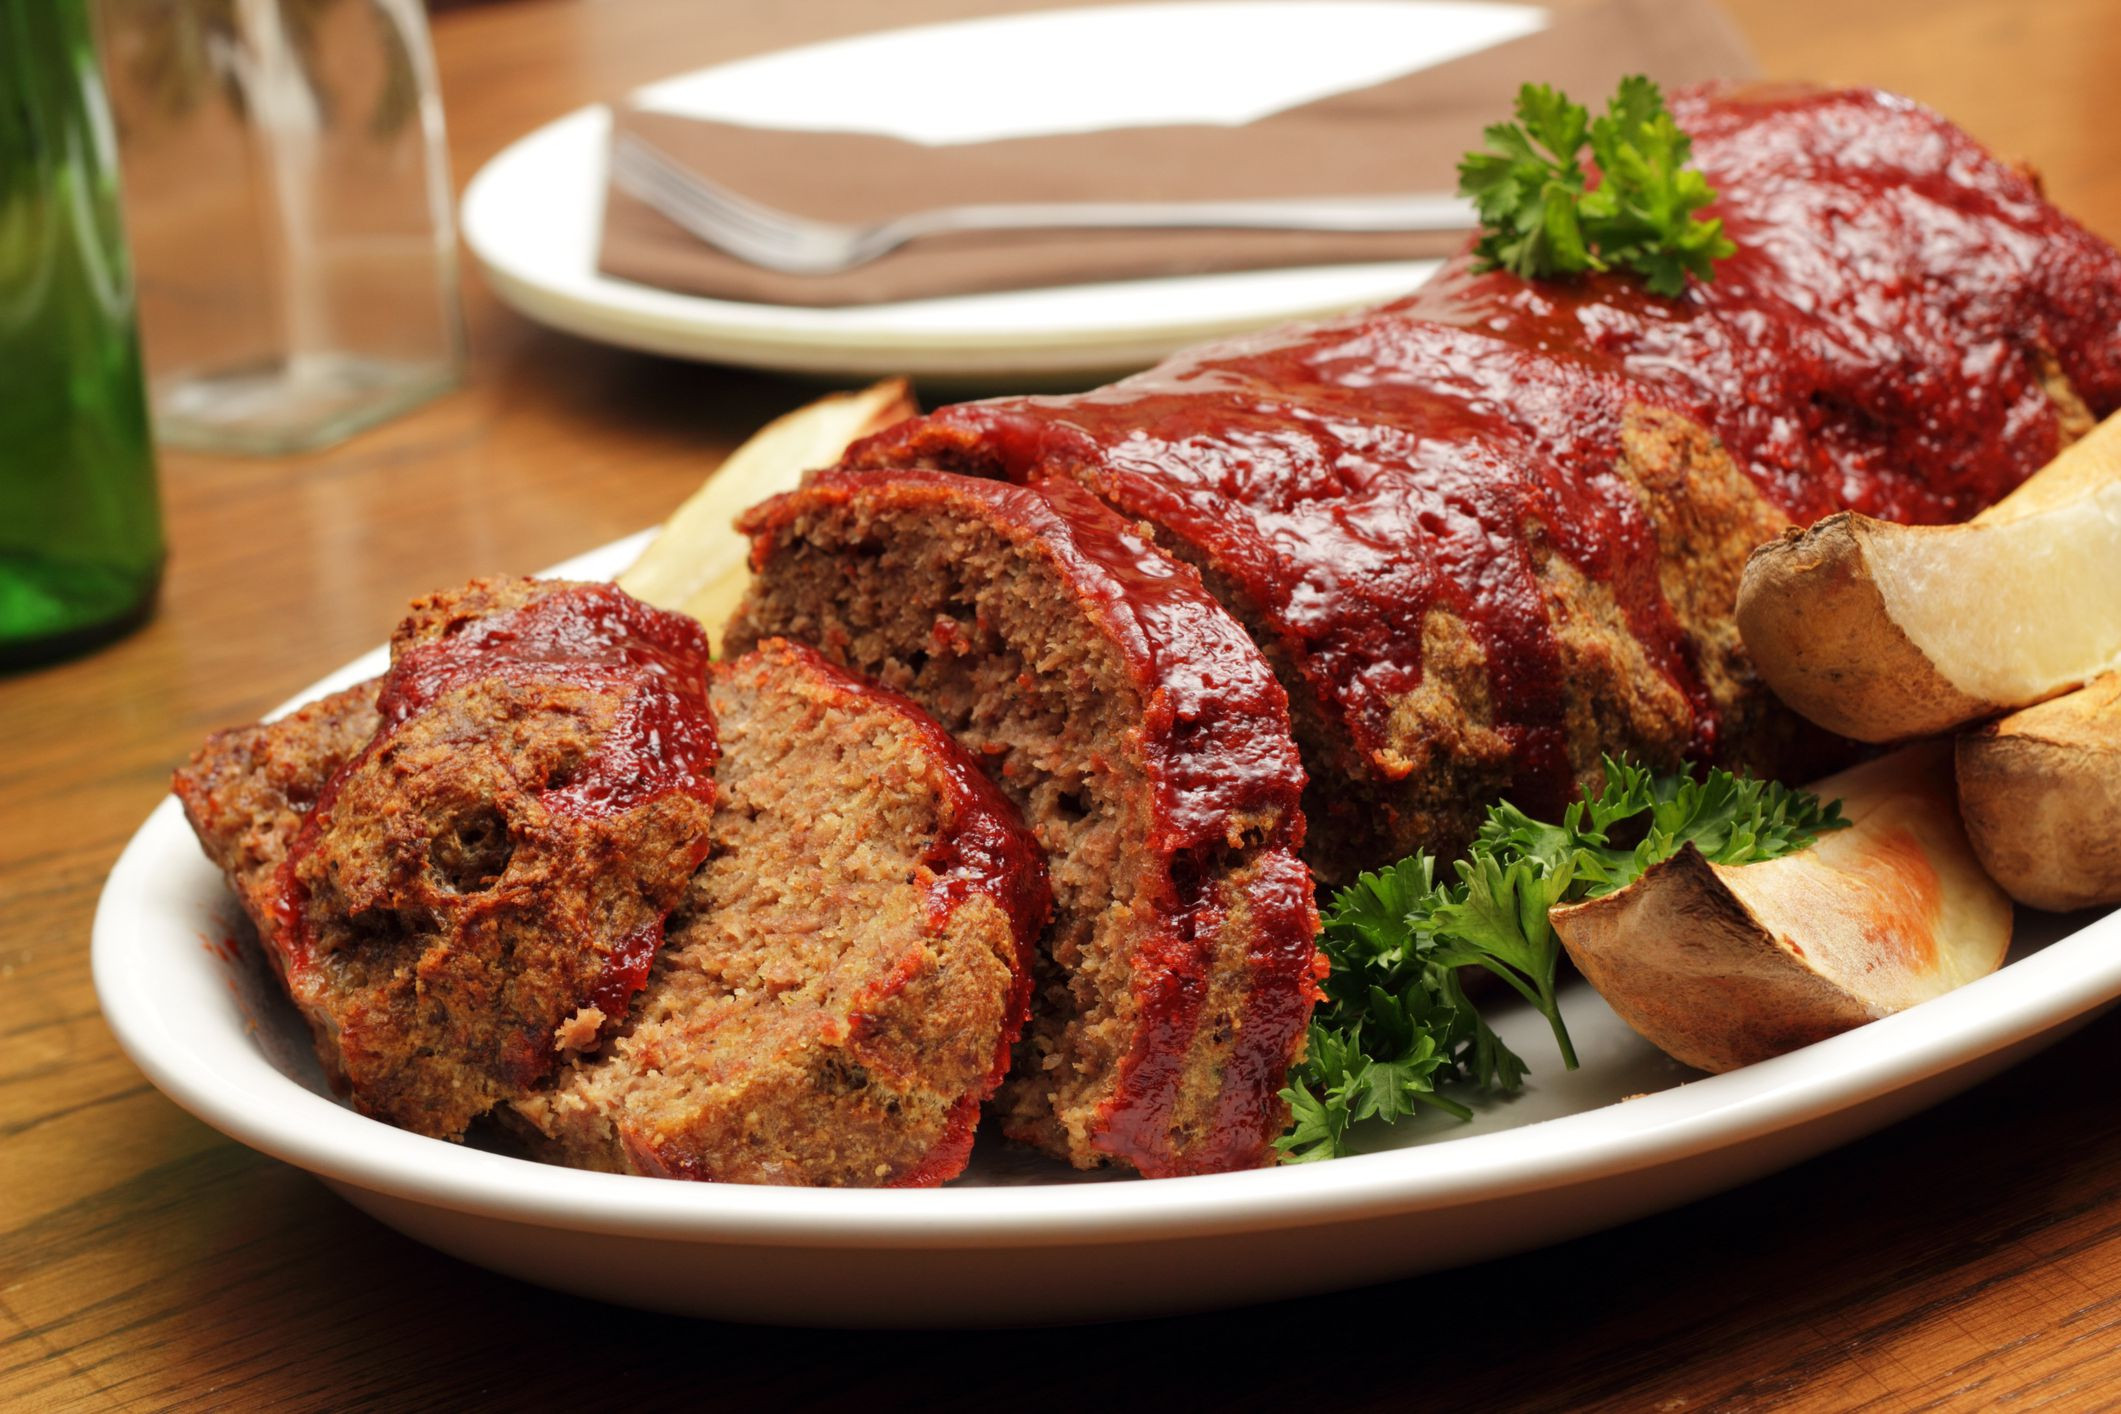 Meatloaf Recipe with Bbq Sauce Awesome Meatloaf with Bbq Sauce Glaze Recipe